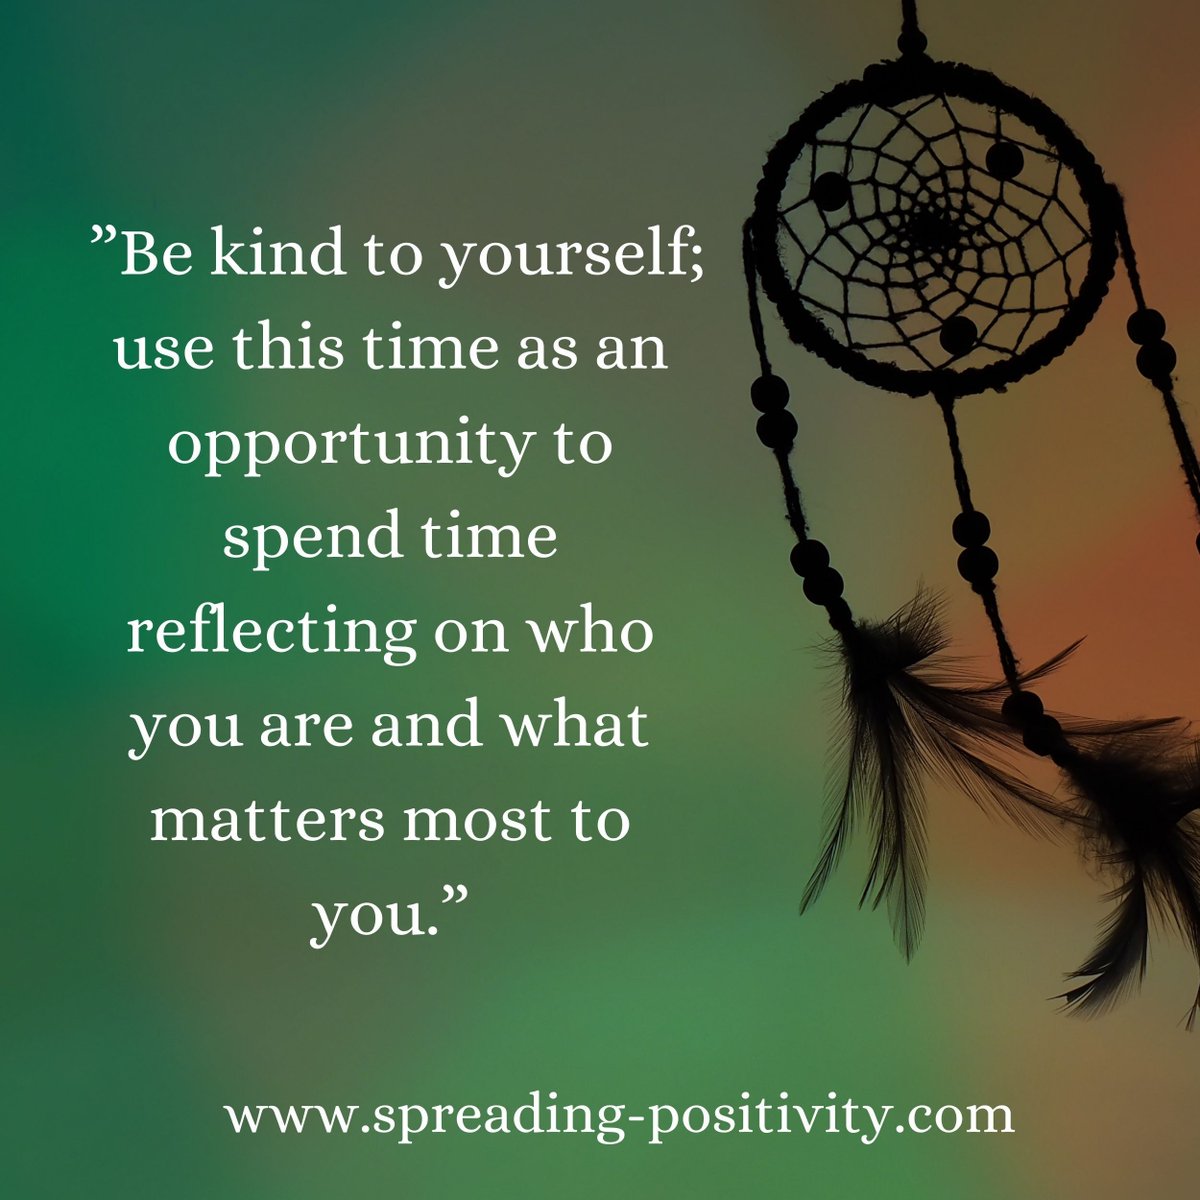 In the hustle and bustle of life, it's all too easy to forget to be kind to one of the most important people in your life – YOU. 🤗💖

#SpreadingPositivity #SelfLove #Reflection #KindnessMatters #SelfCare #Hope #Encouragement #Empowerment #BeKindToYourself